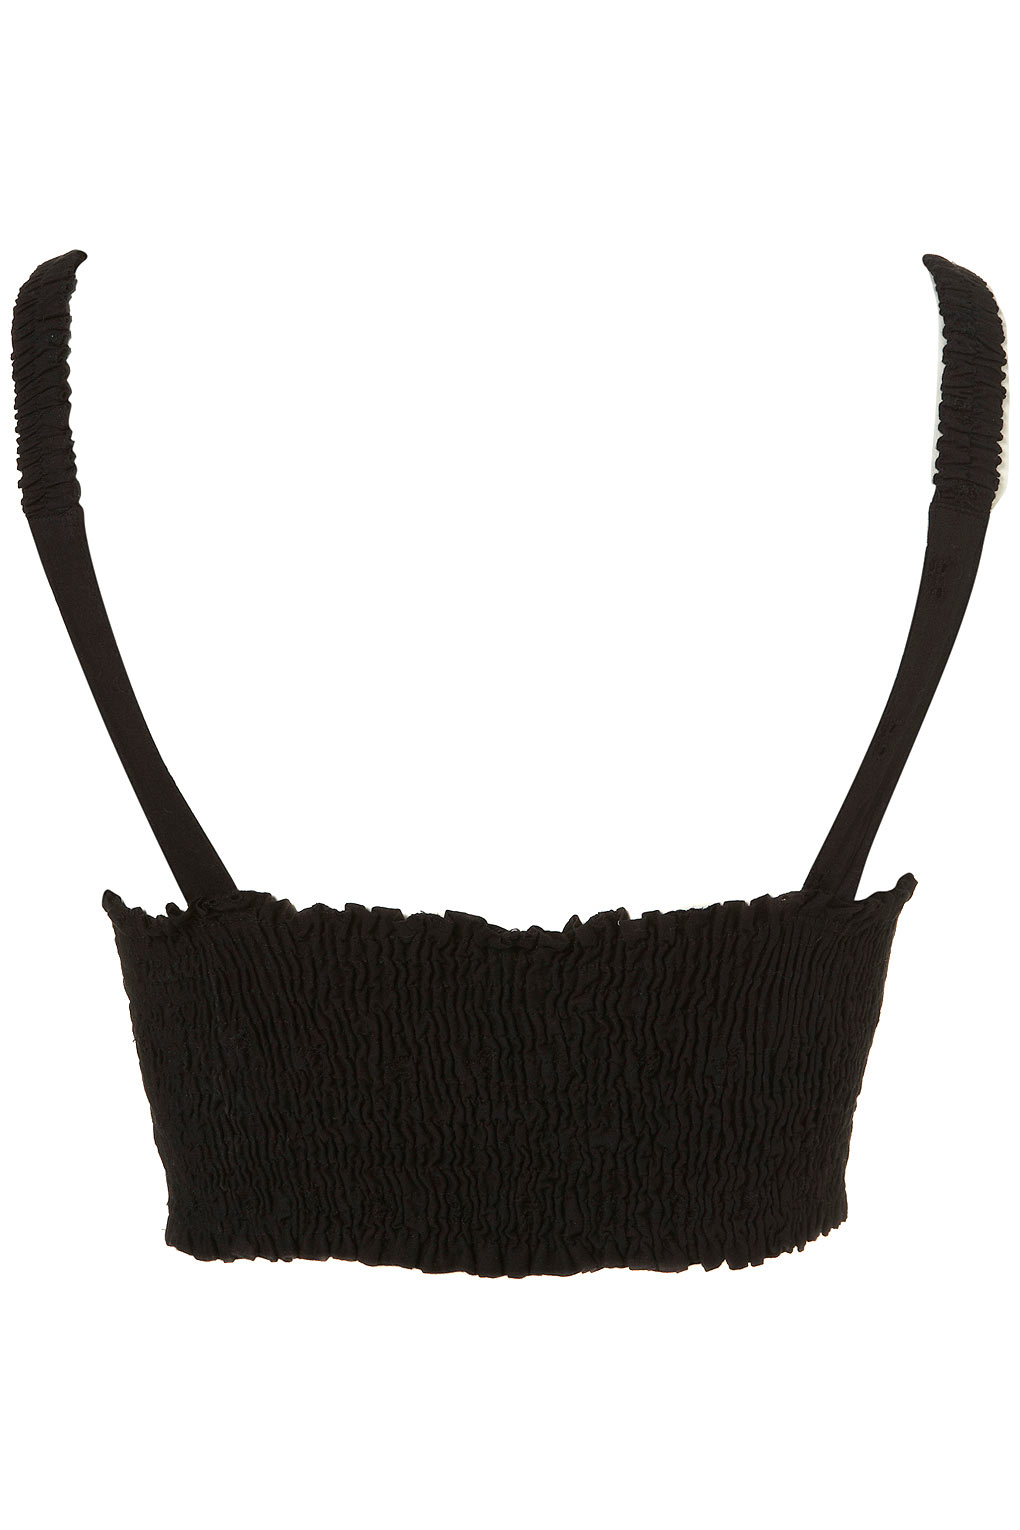 Lyst - Topshop Broderie Anglaise Bralet Top in Black